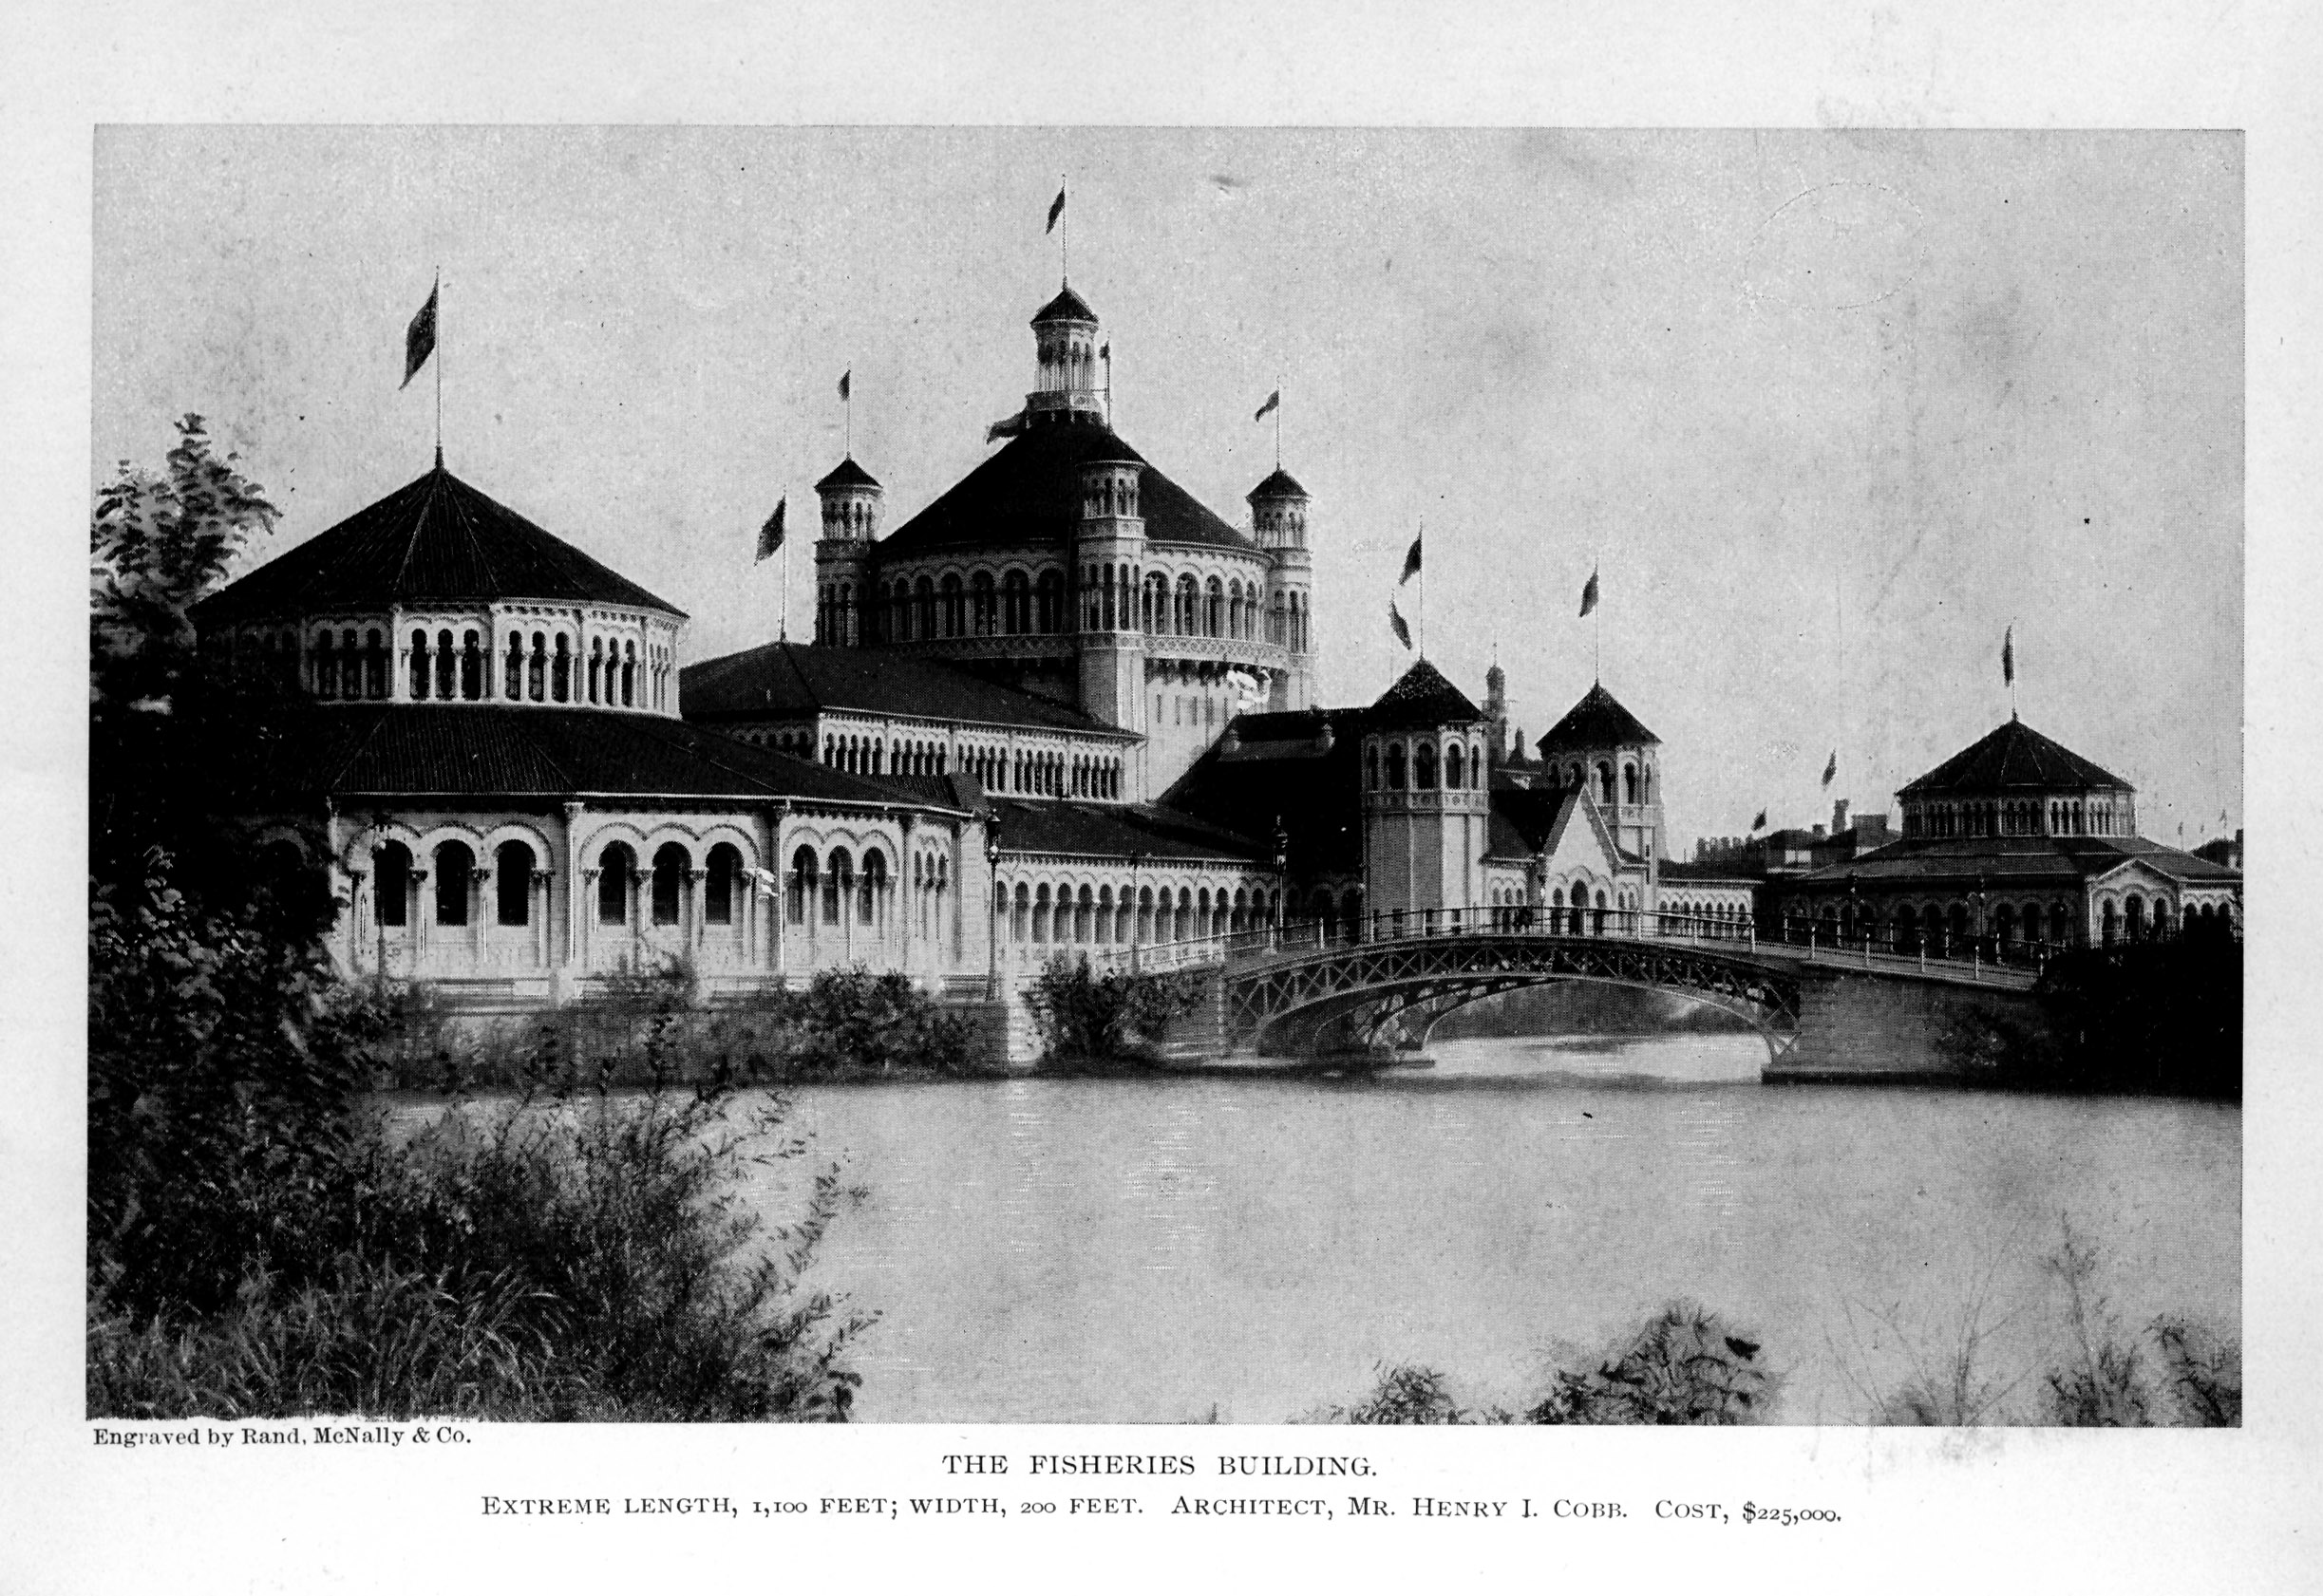 large building with several towers and circular wings built on waterfront